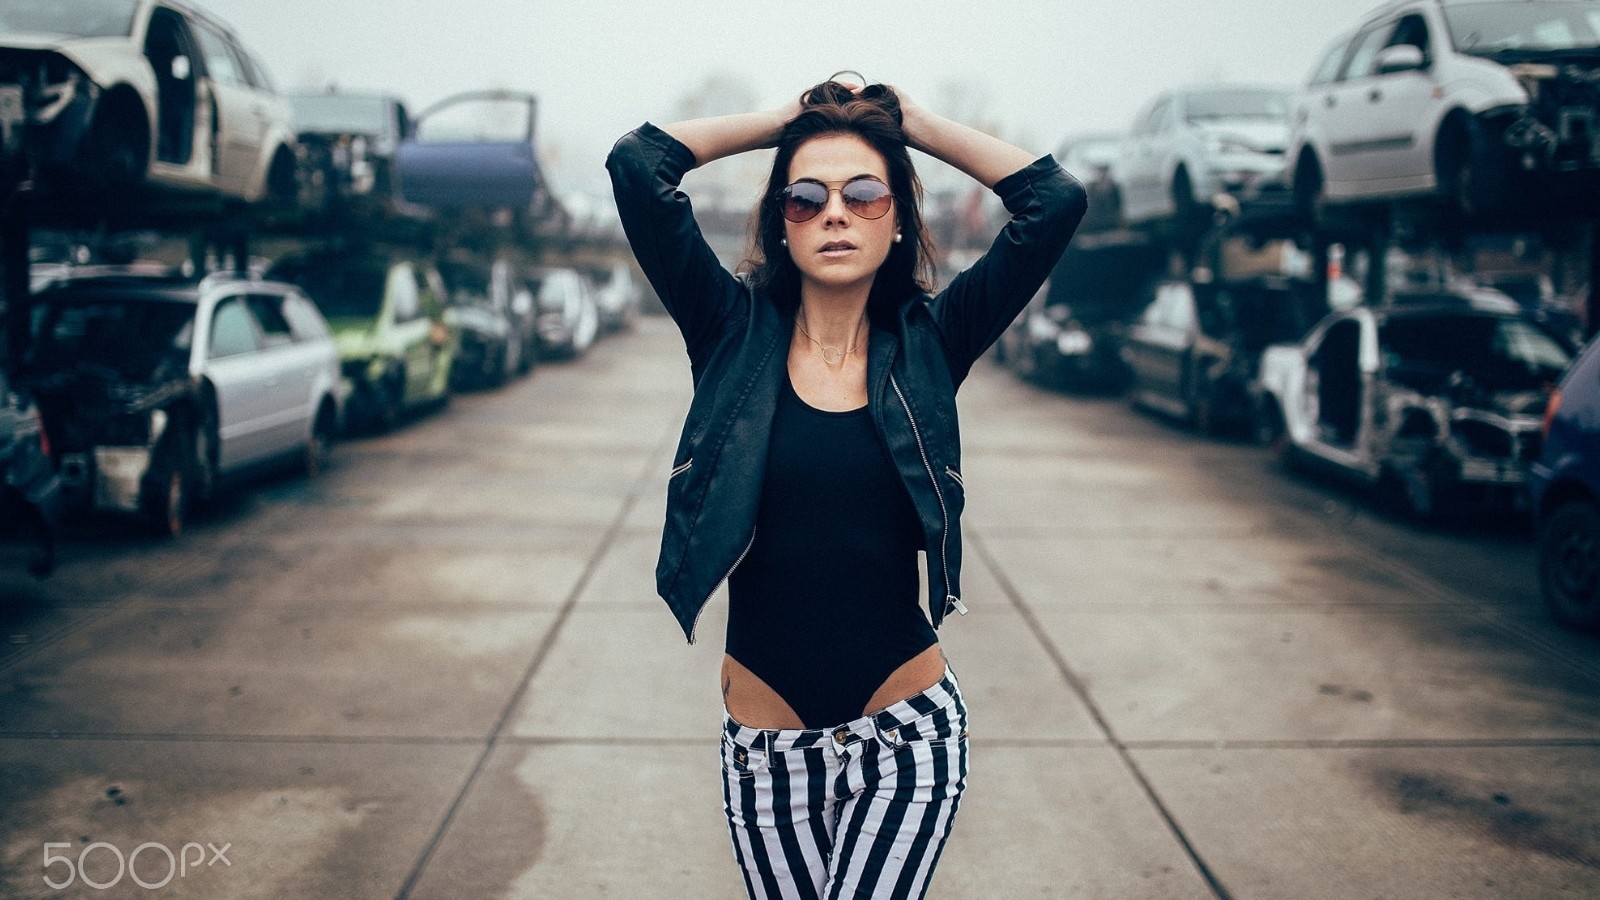 People 1600x900 women women with glasses arms up model wreck 500px women with shades sunglasses women with cars car vehicle bodysuit striped clothing women outdoors brunette junkyard